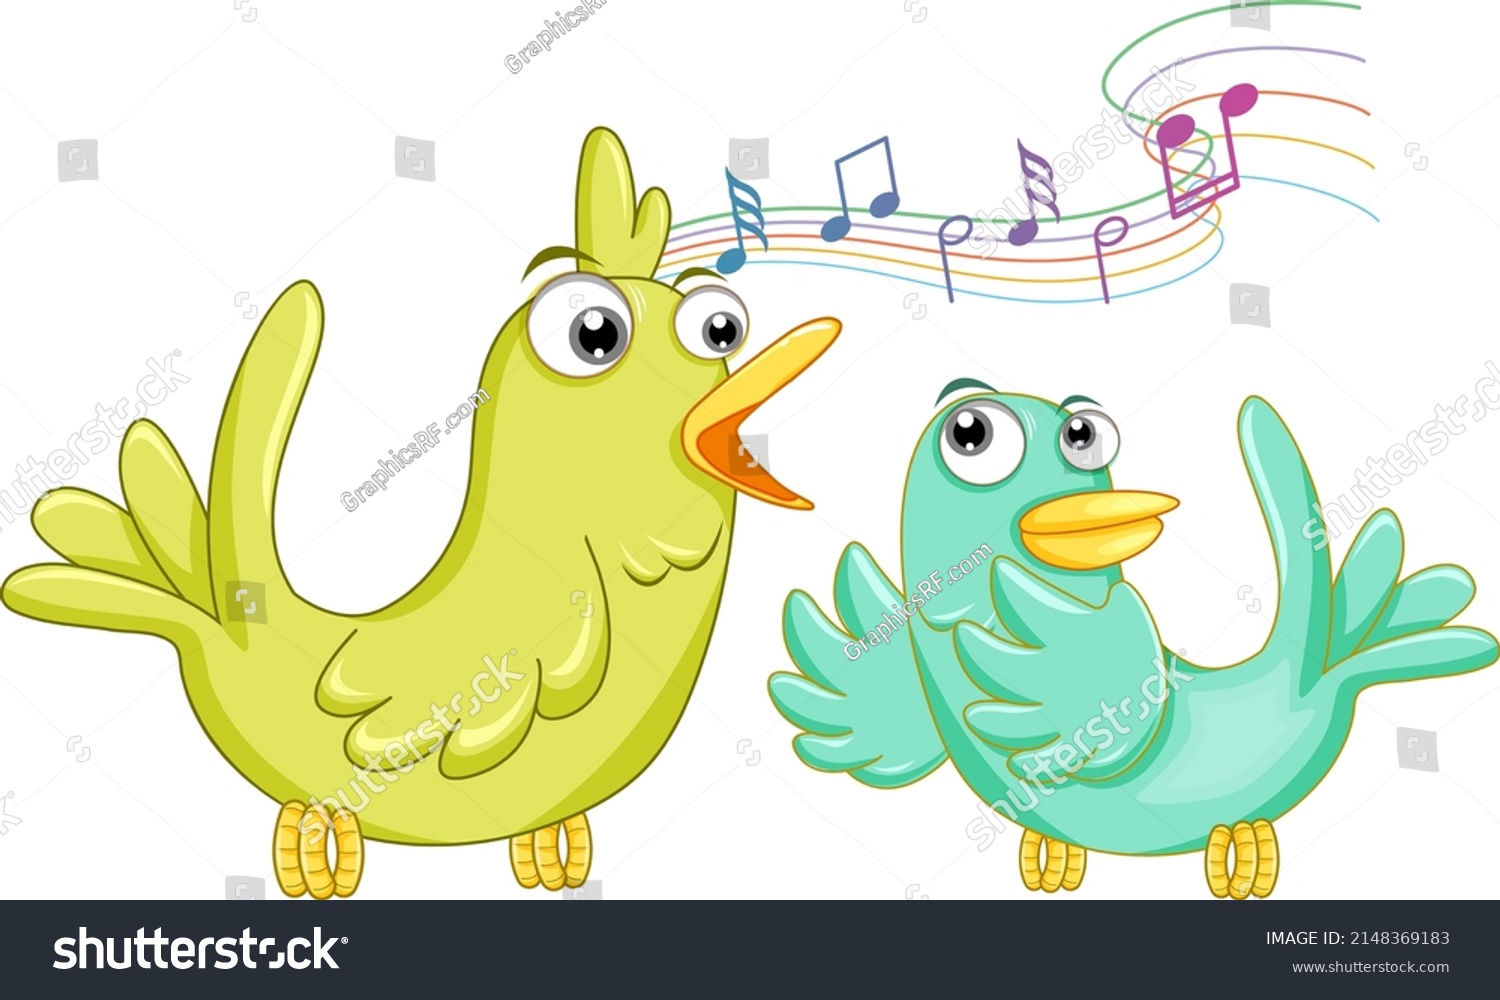 two-birds-singing-song-illustration-stock-vector-royalty-free